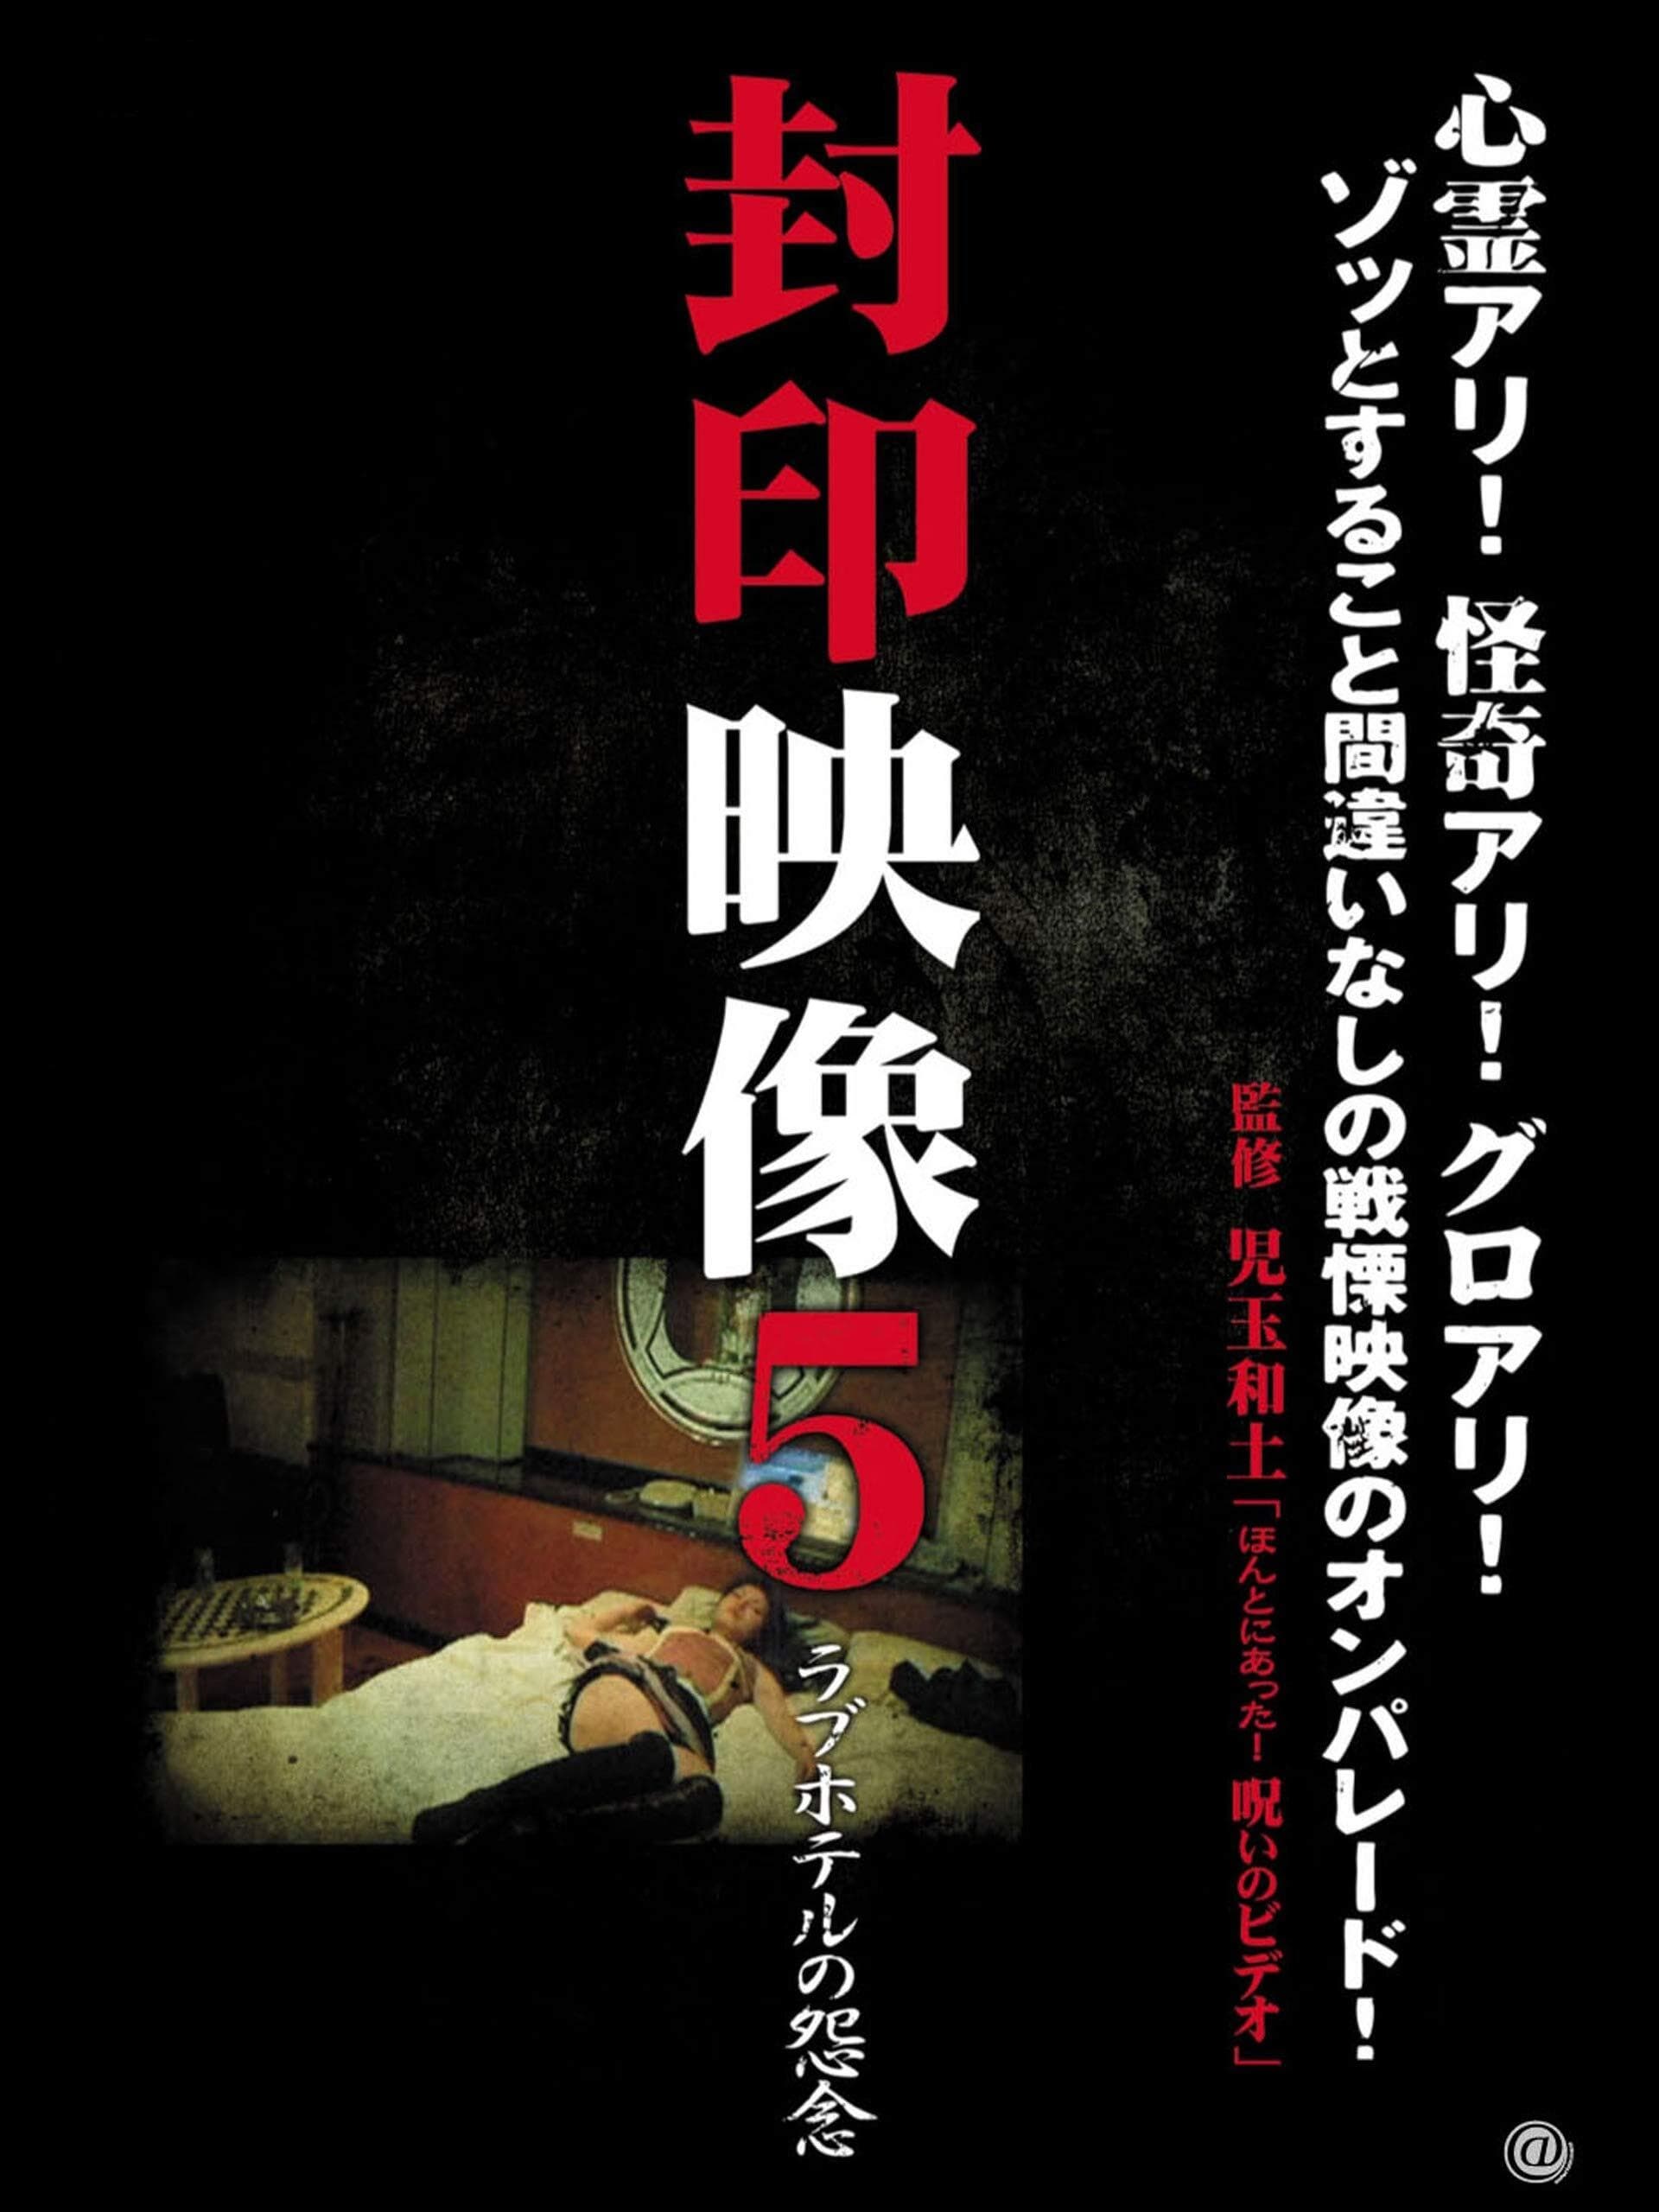 Sealed Video 5: Love Hotel Grudge